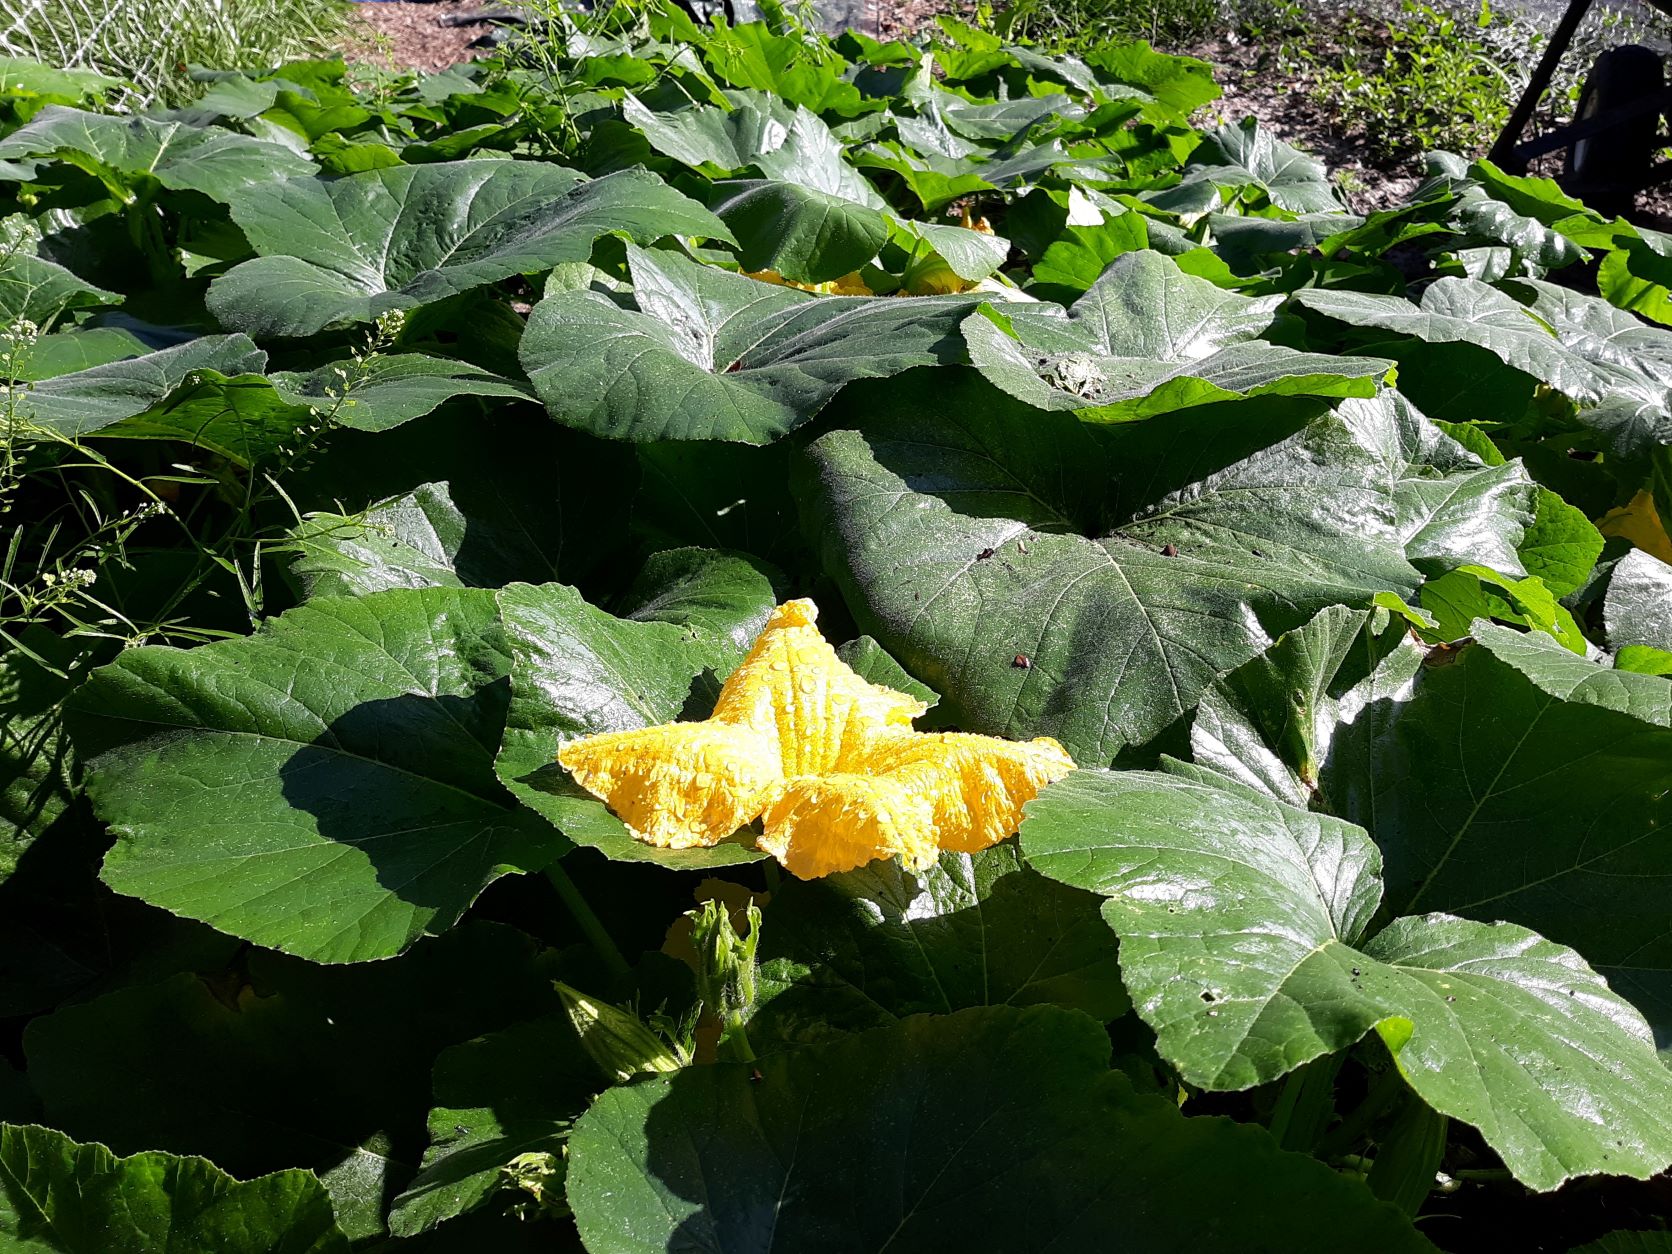 yellow squash flower among the green leaves